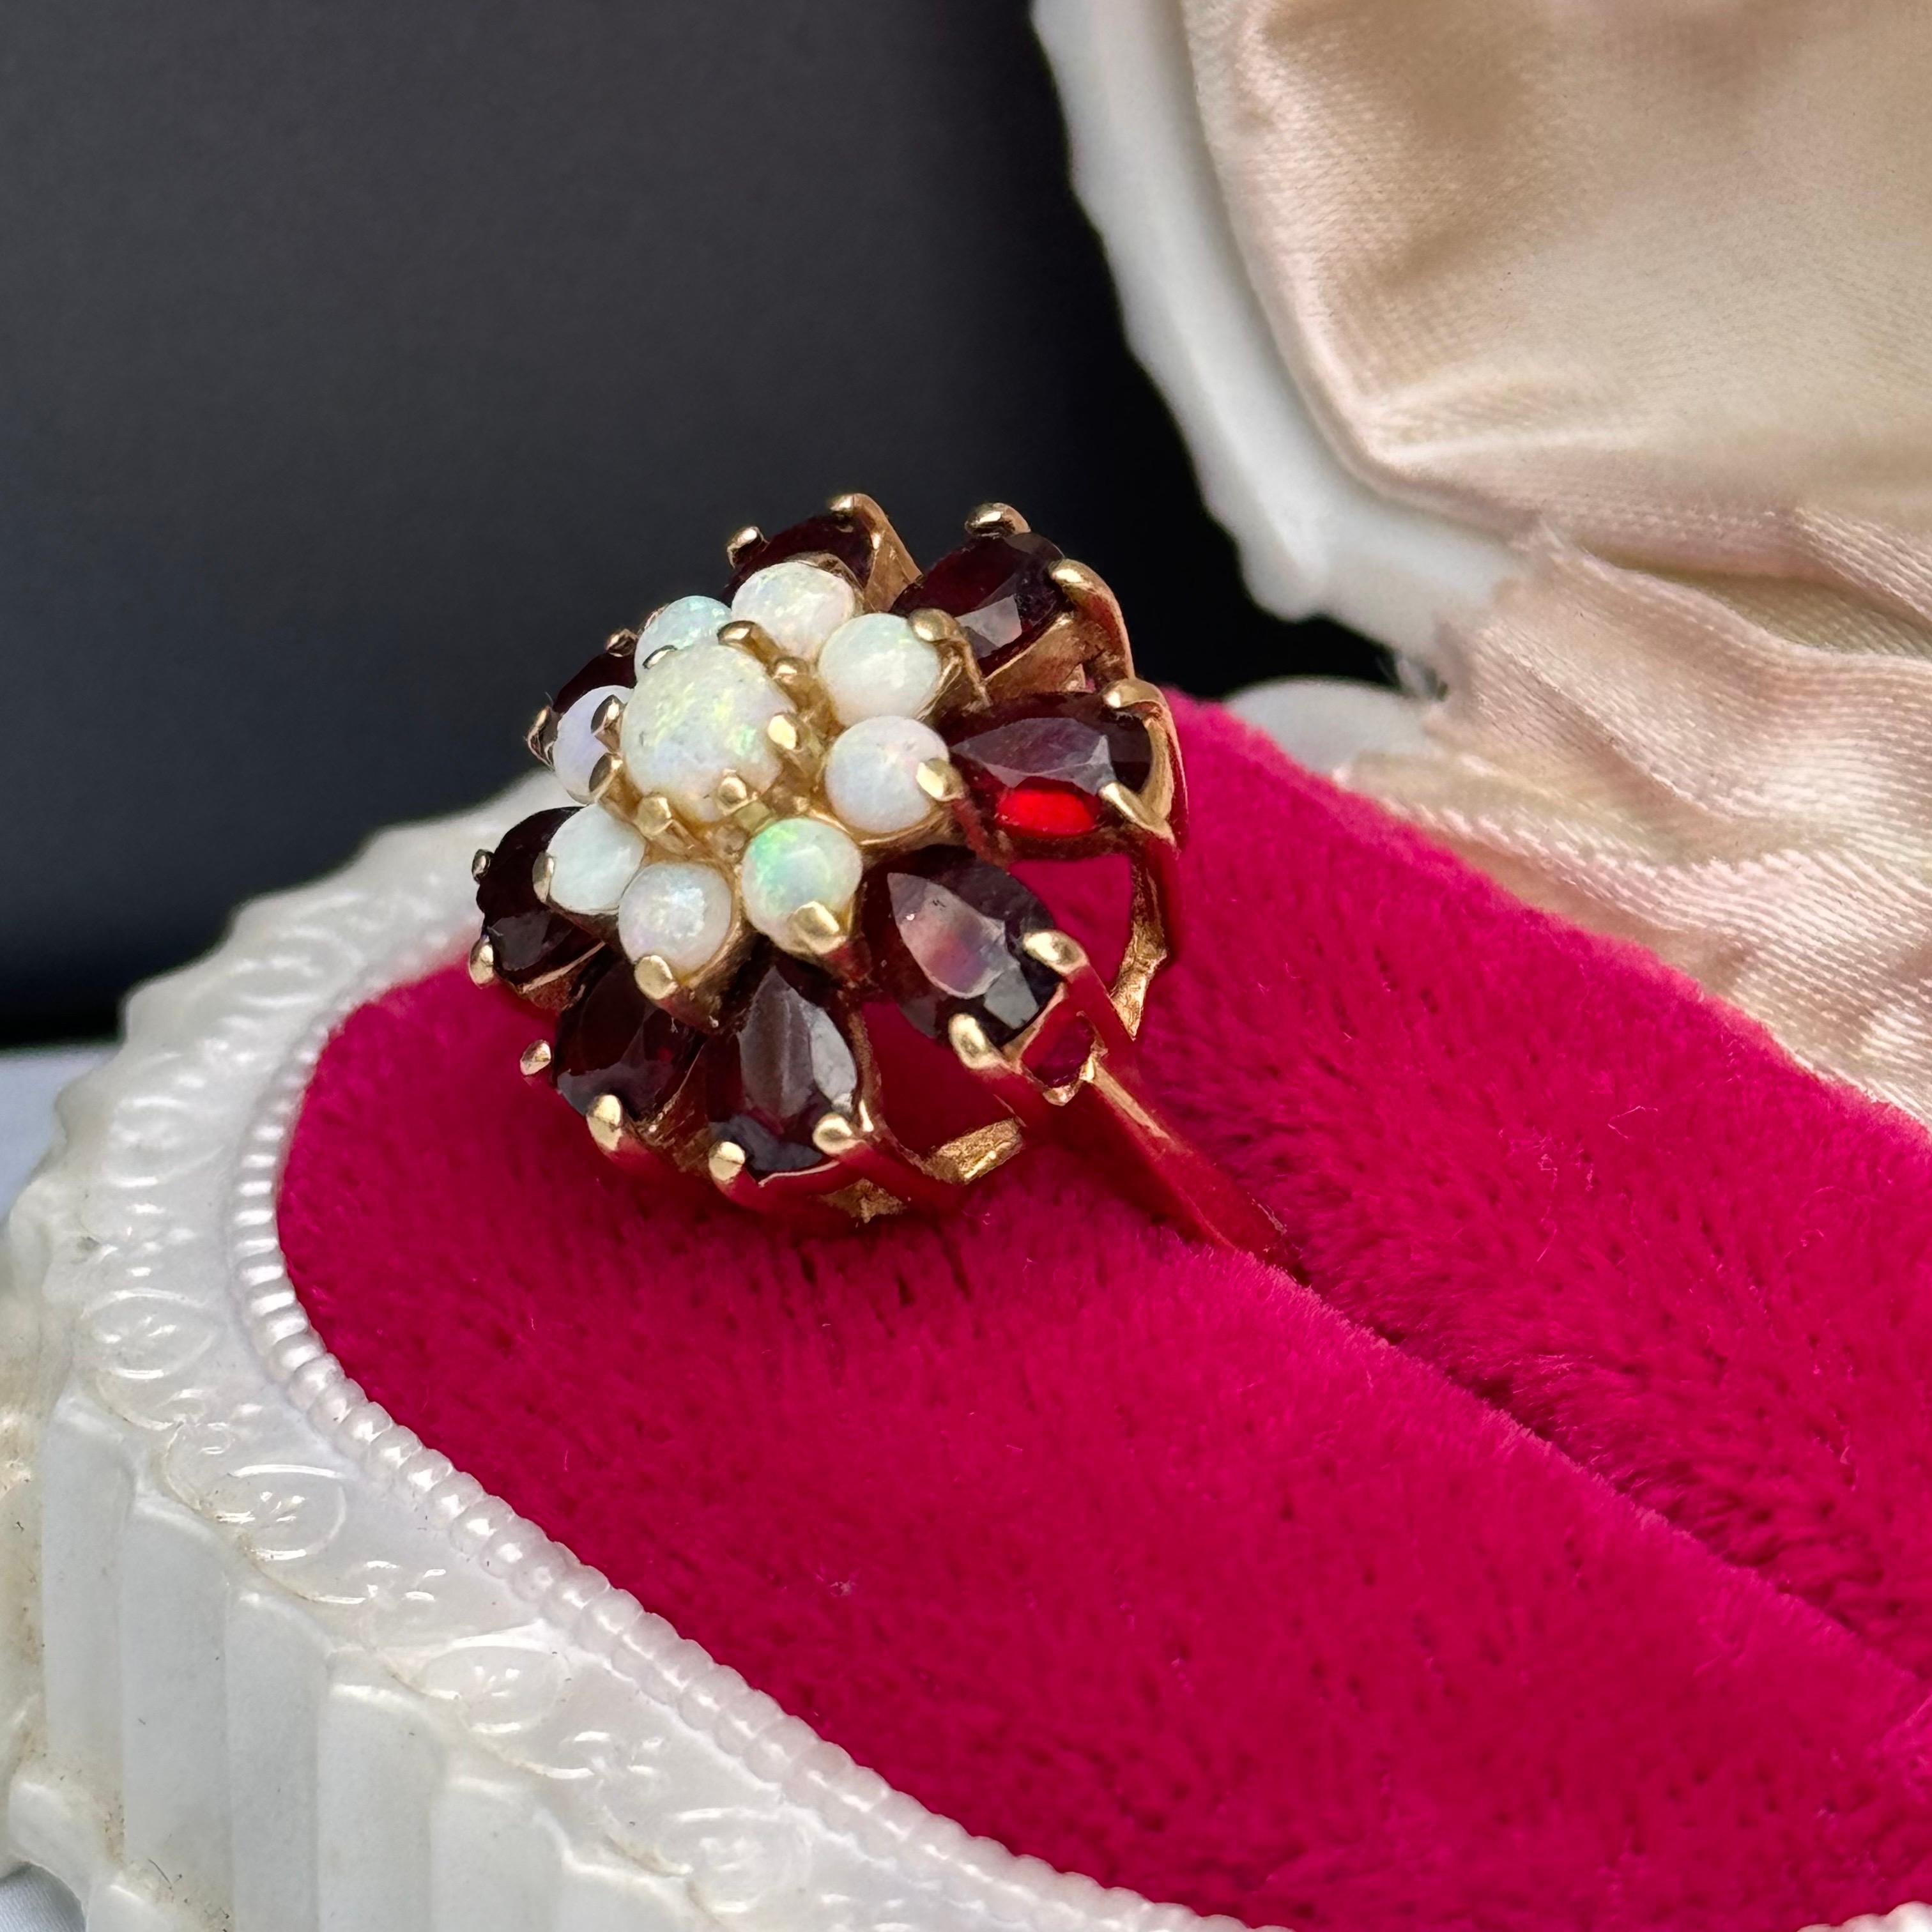 Vintage  Victorian Revival Opal Garnet Cluster Cocktail Ring in 14kt Gold, a stunning homage to the elegance of the Victorian era. This exquisite ring features a cluster of opals and garnets set in luxurious 14kt gold, evoking the opulence and